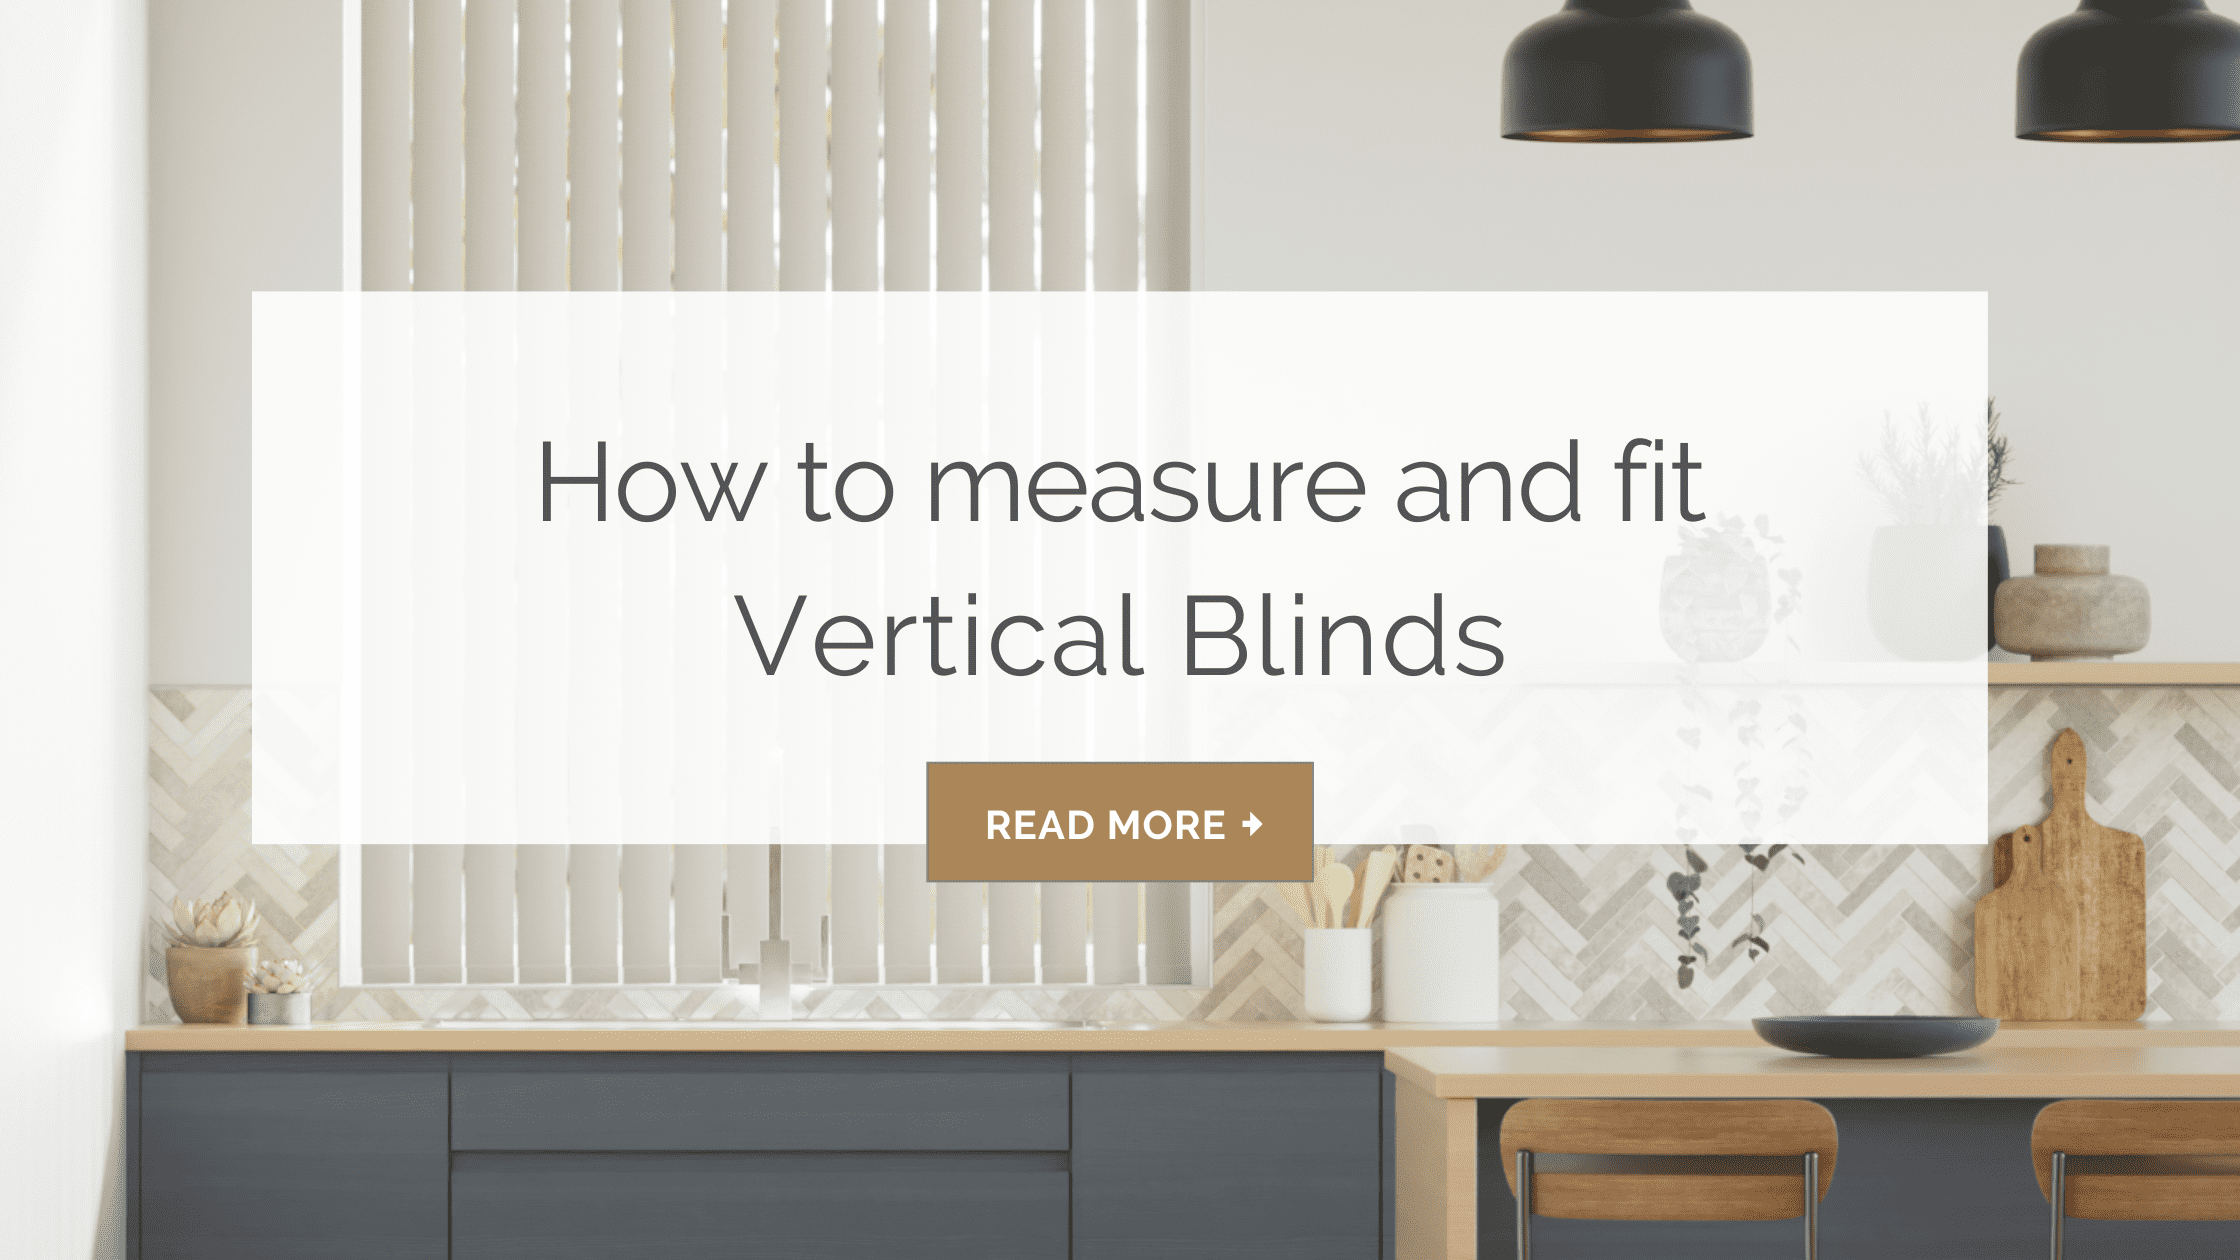 How to measure and fit vertical blinds